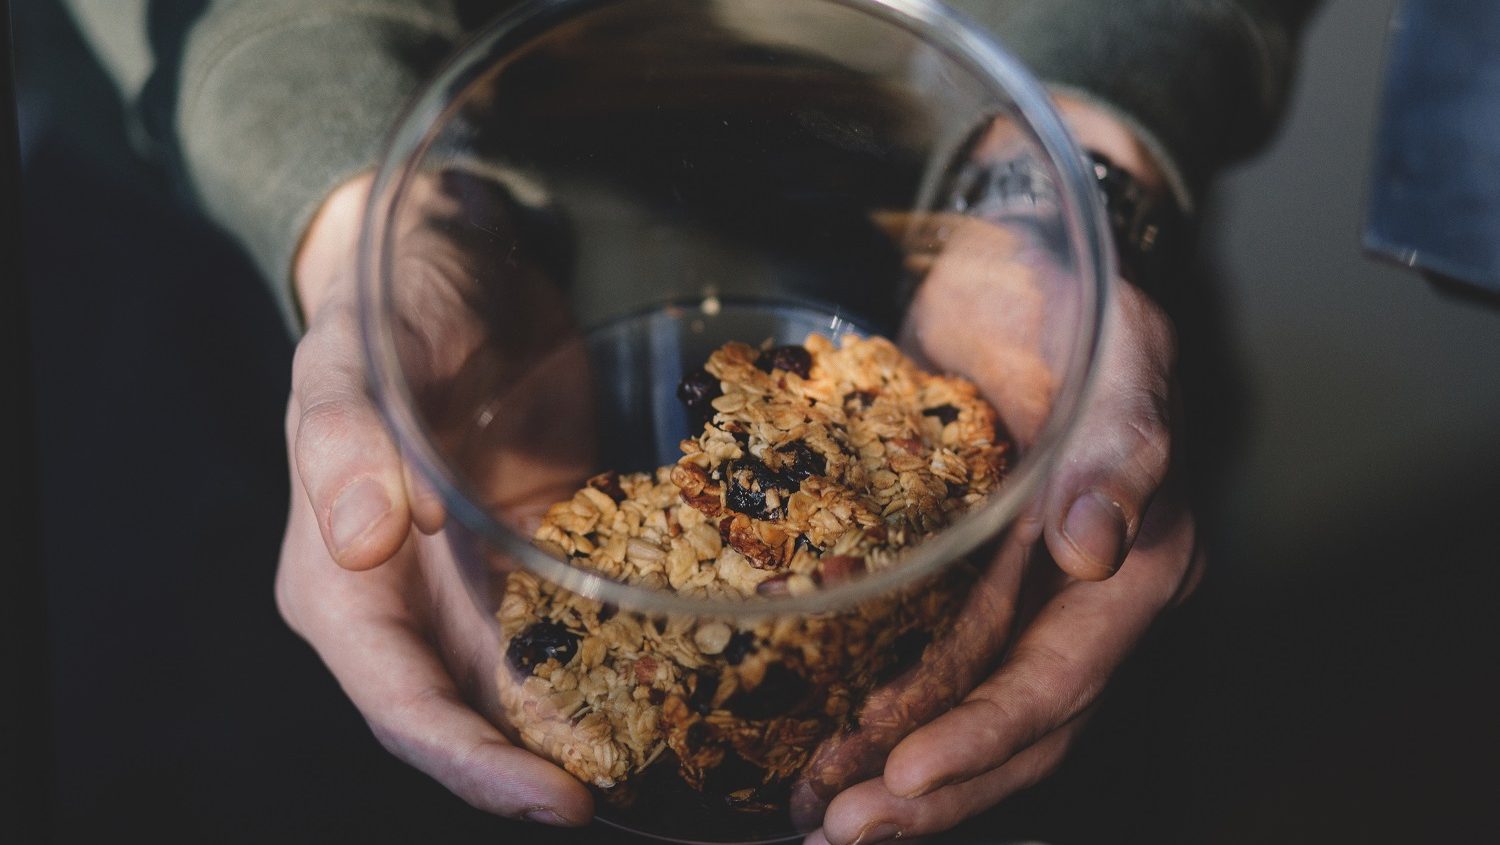 Photo by Joanna Malinowska from Freestocks.org. Image of a pair or hands holding a clear glass cookie jar with what look like oatmeal and raisin cookies inside. Shot taken from above looking down into the jar at an angle.